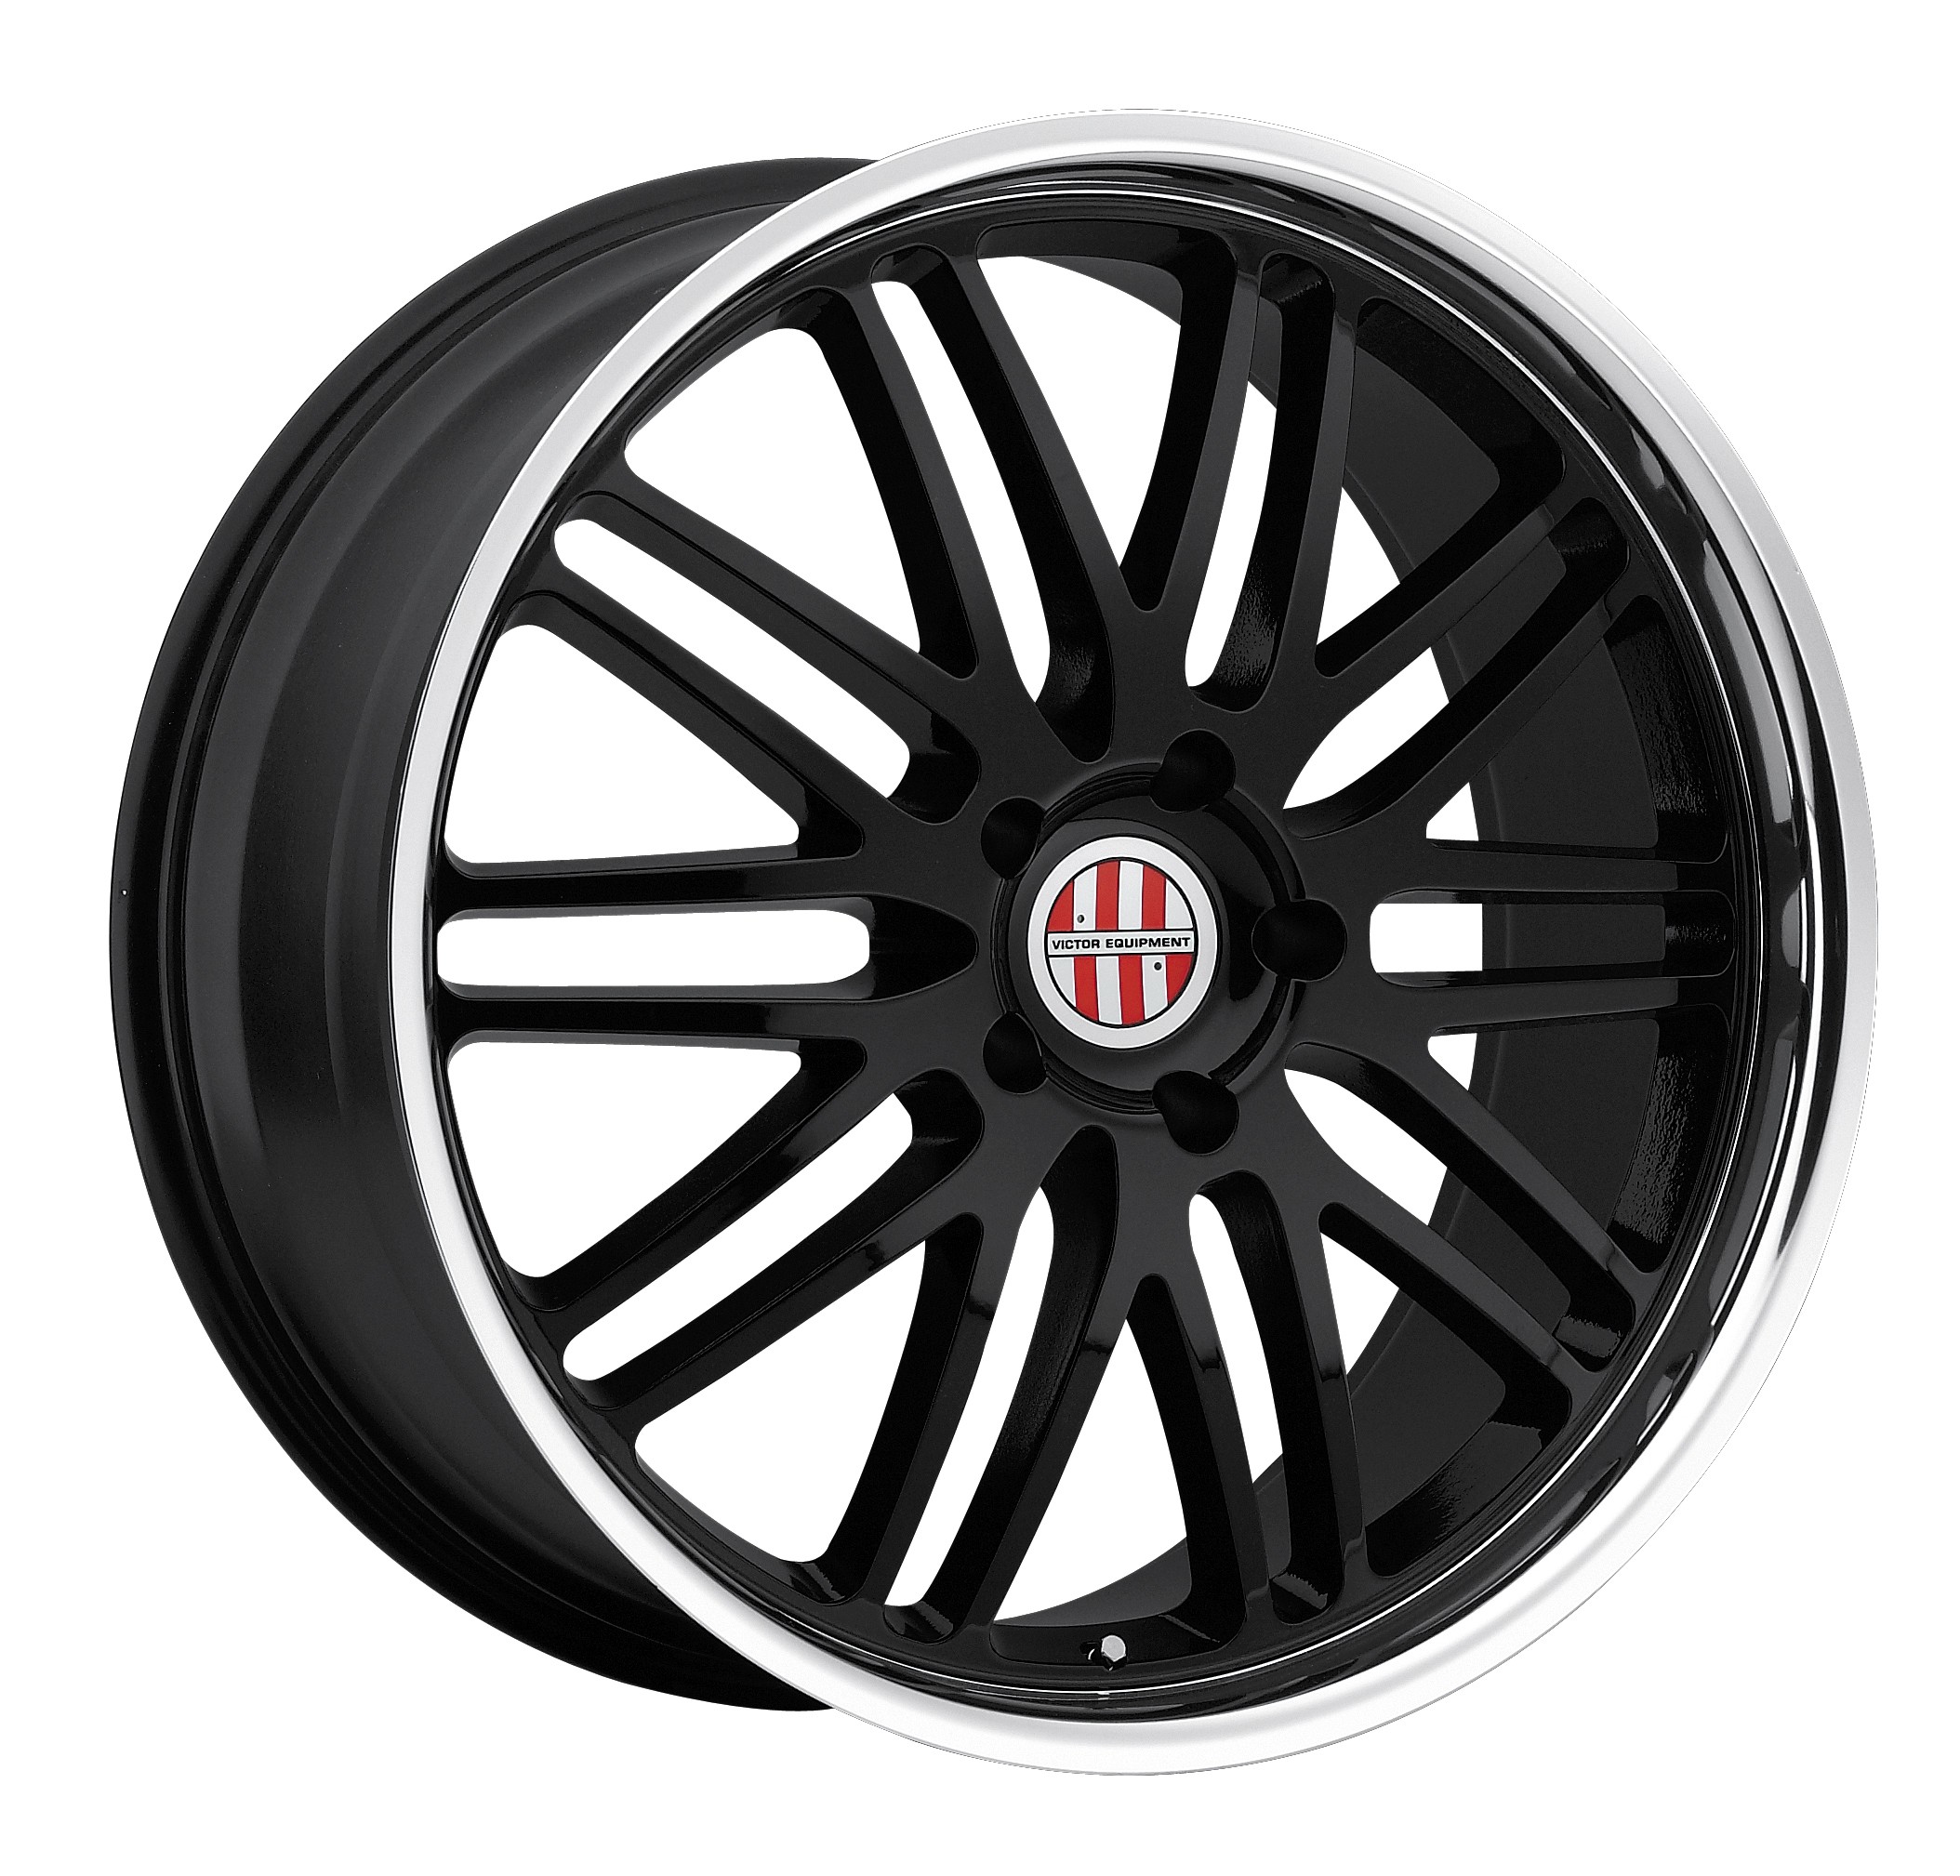 Lemans - #1 Official Indian Victor Wheels Distributor